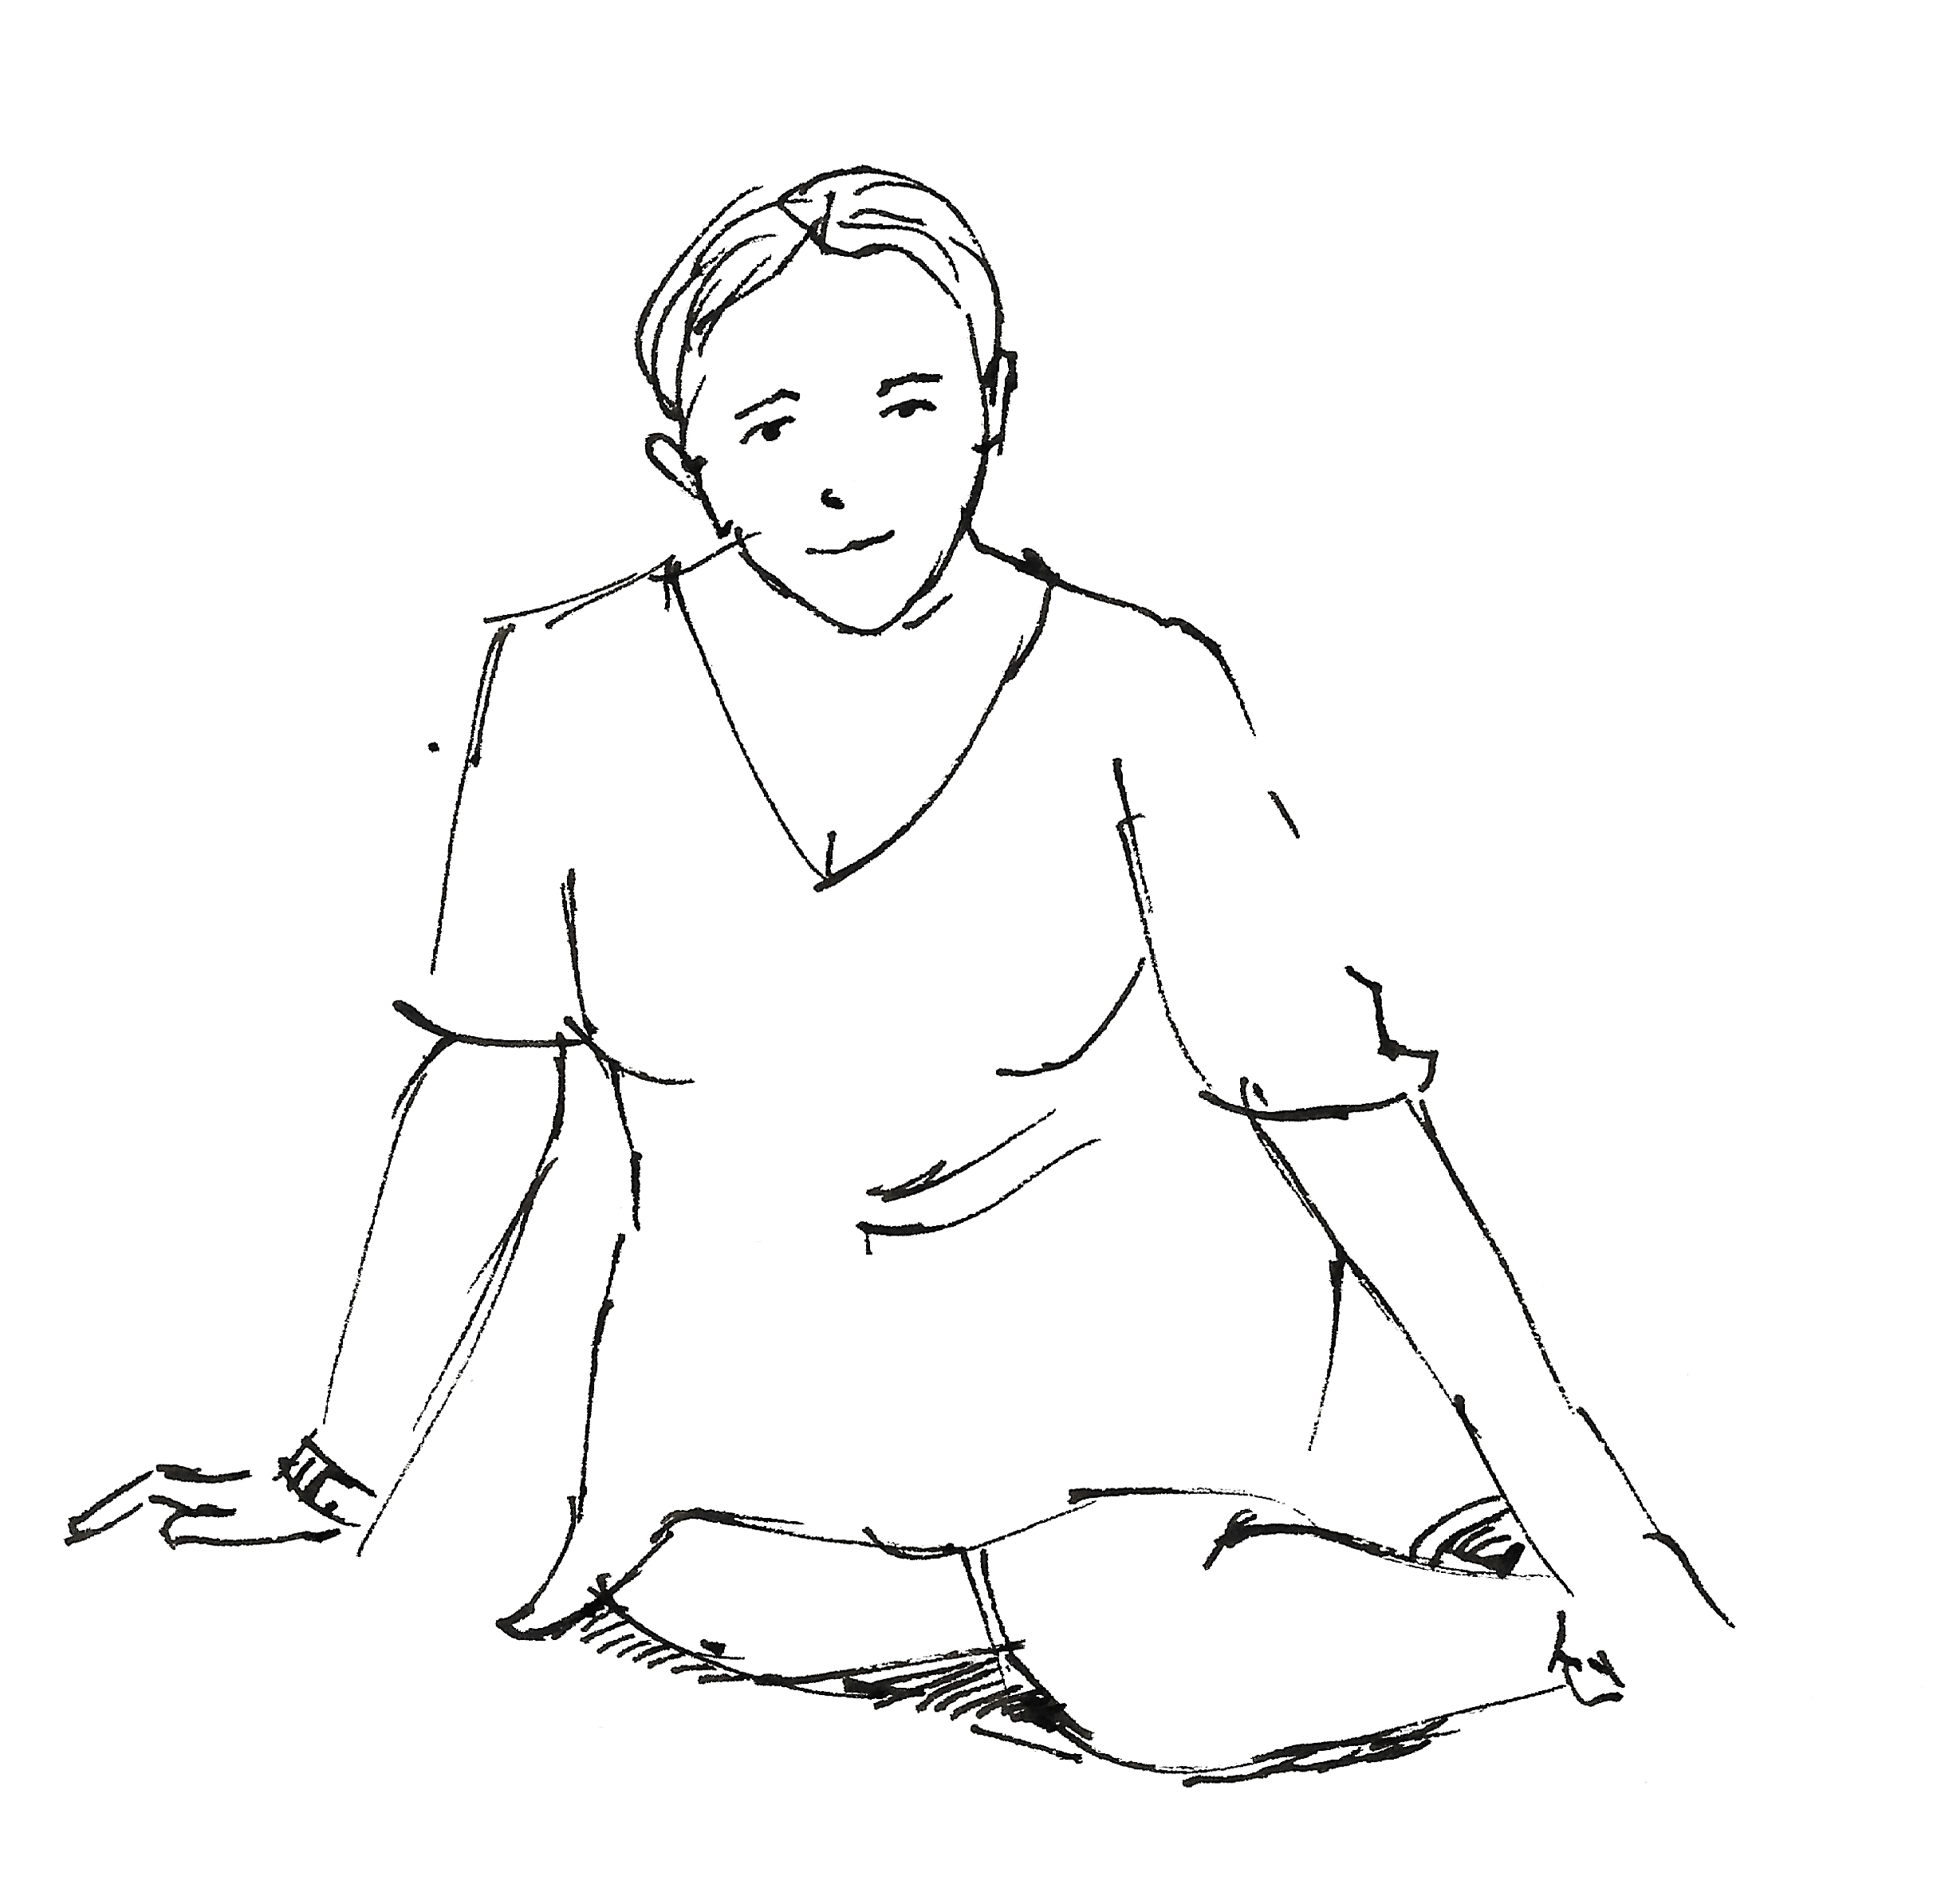 Drawing of girl sitting down